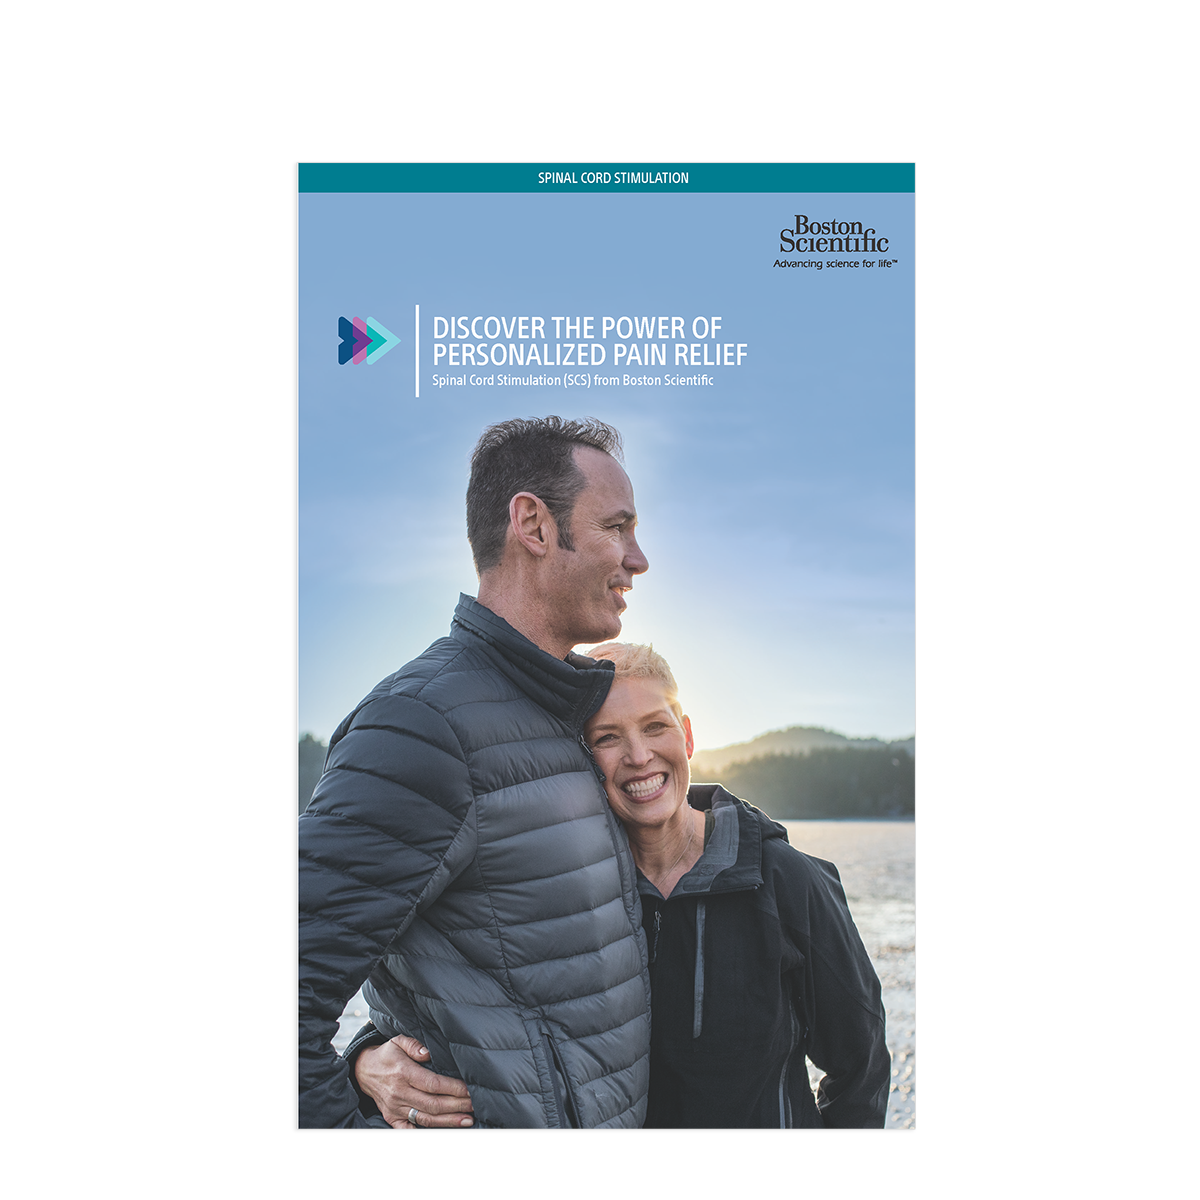 SCS information kit titled “Discover the power of personalized pain relief” and DVD.